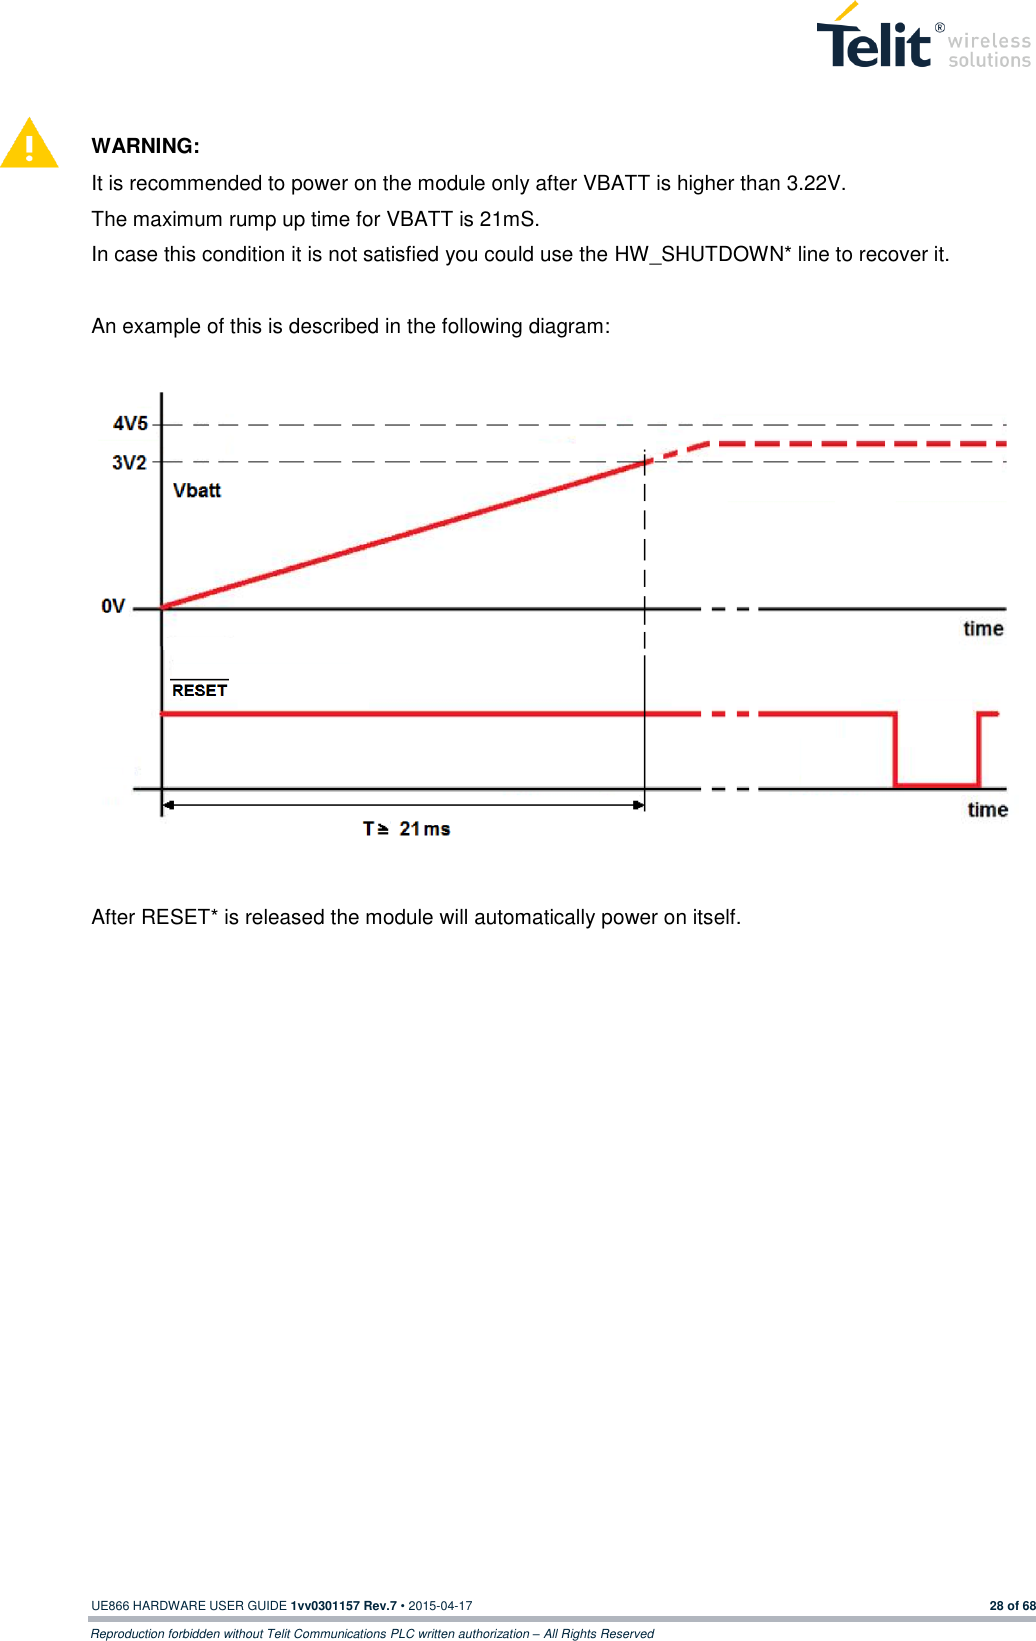  UE866 HARDWARE USER GUIDE 1vv0301157 Rev.7 • 2015-04-17 28 of 68 Reproduction forbidden without Telit Communications PLC written authorization – All Rights Reserved   WARNING: It is recommended to power on the module only after VBATT is higher than 3.22V.  The maximum rump up time for VBATT is 21mS. In case this condition it is not satisfied you could use the HW_SHUTDOWN* line to recover it.   An example of this is described in the following diagram:   After RESET* is released the module will automatically power on itself.    